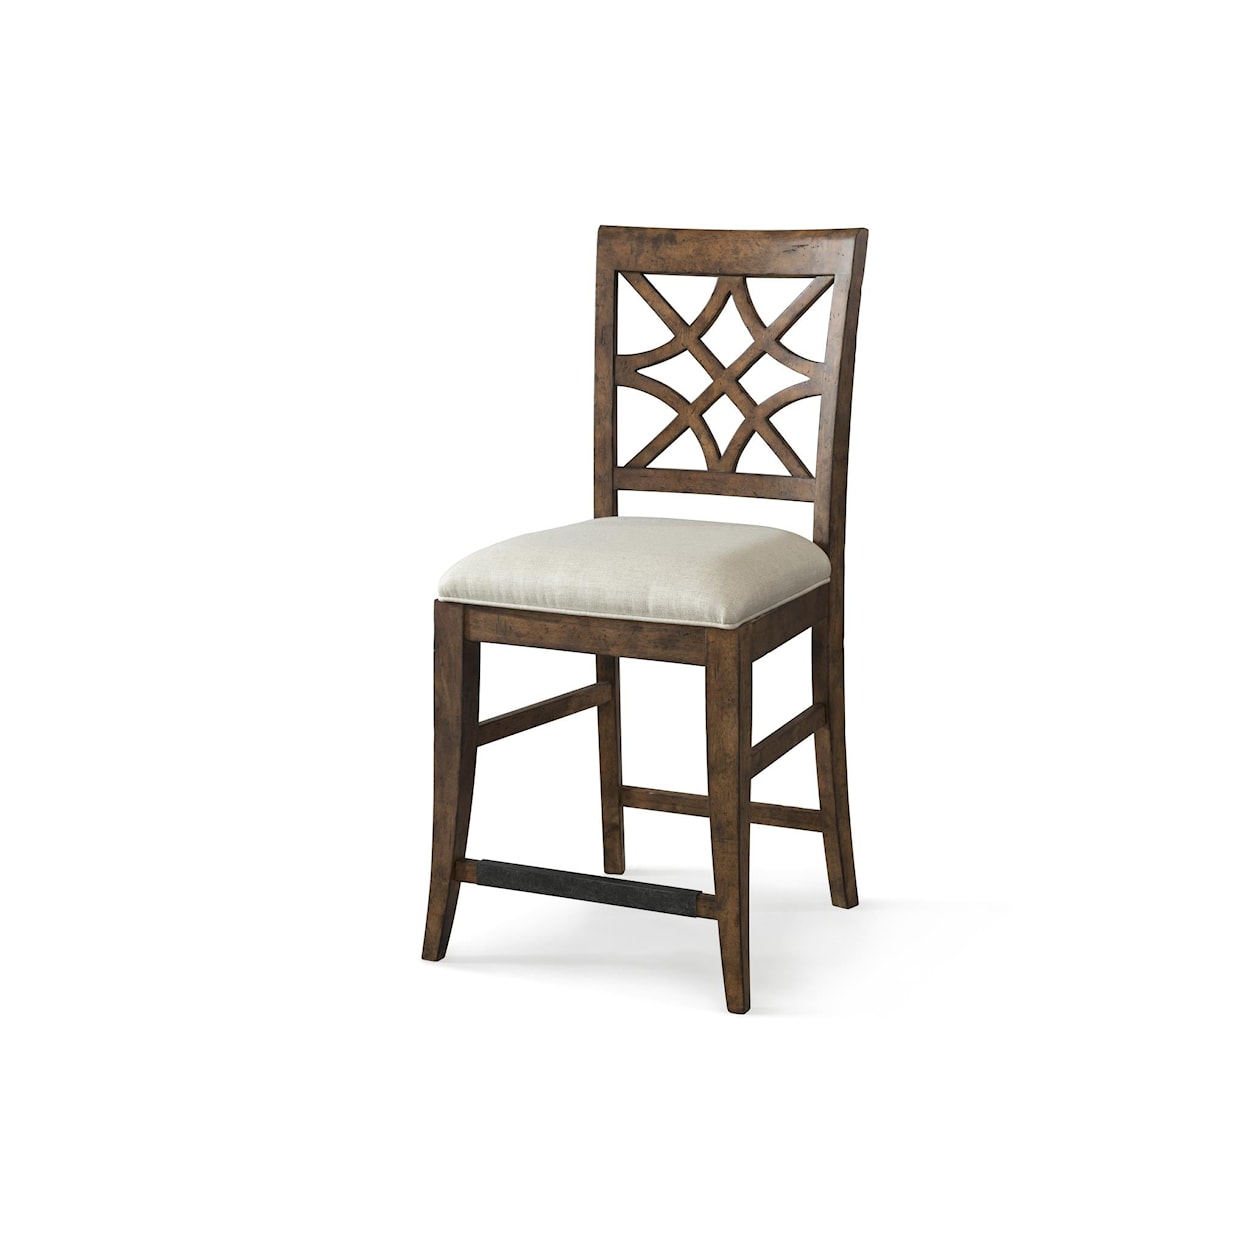 Trisha Yearwood Home Collection by Legacy Classic Trisha Yearwood Home Counter Height Chair